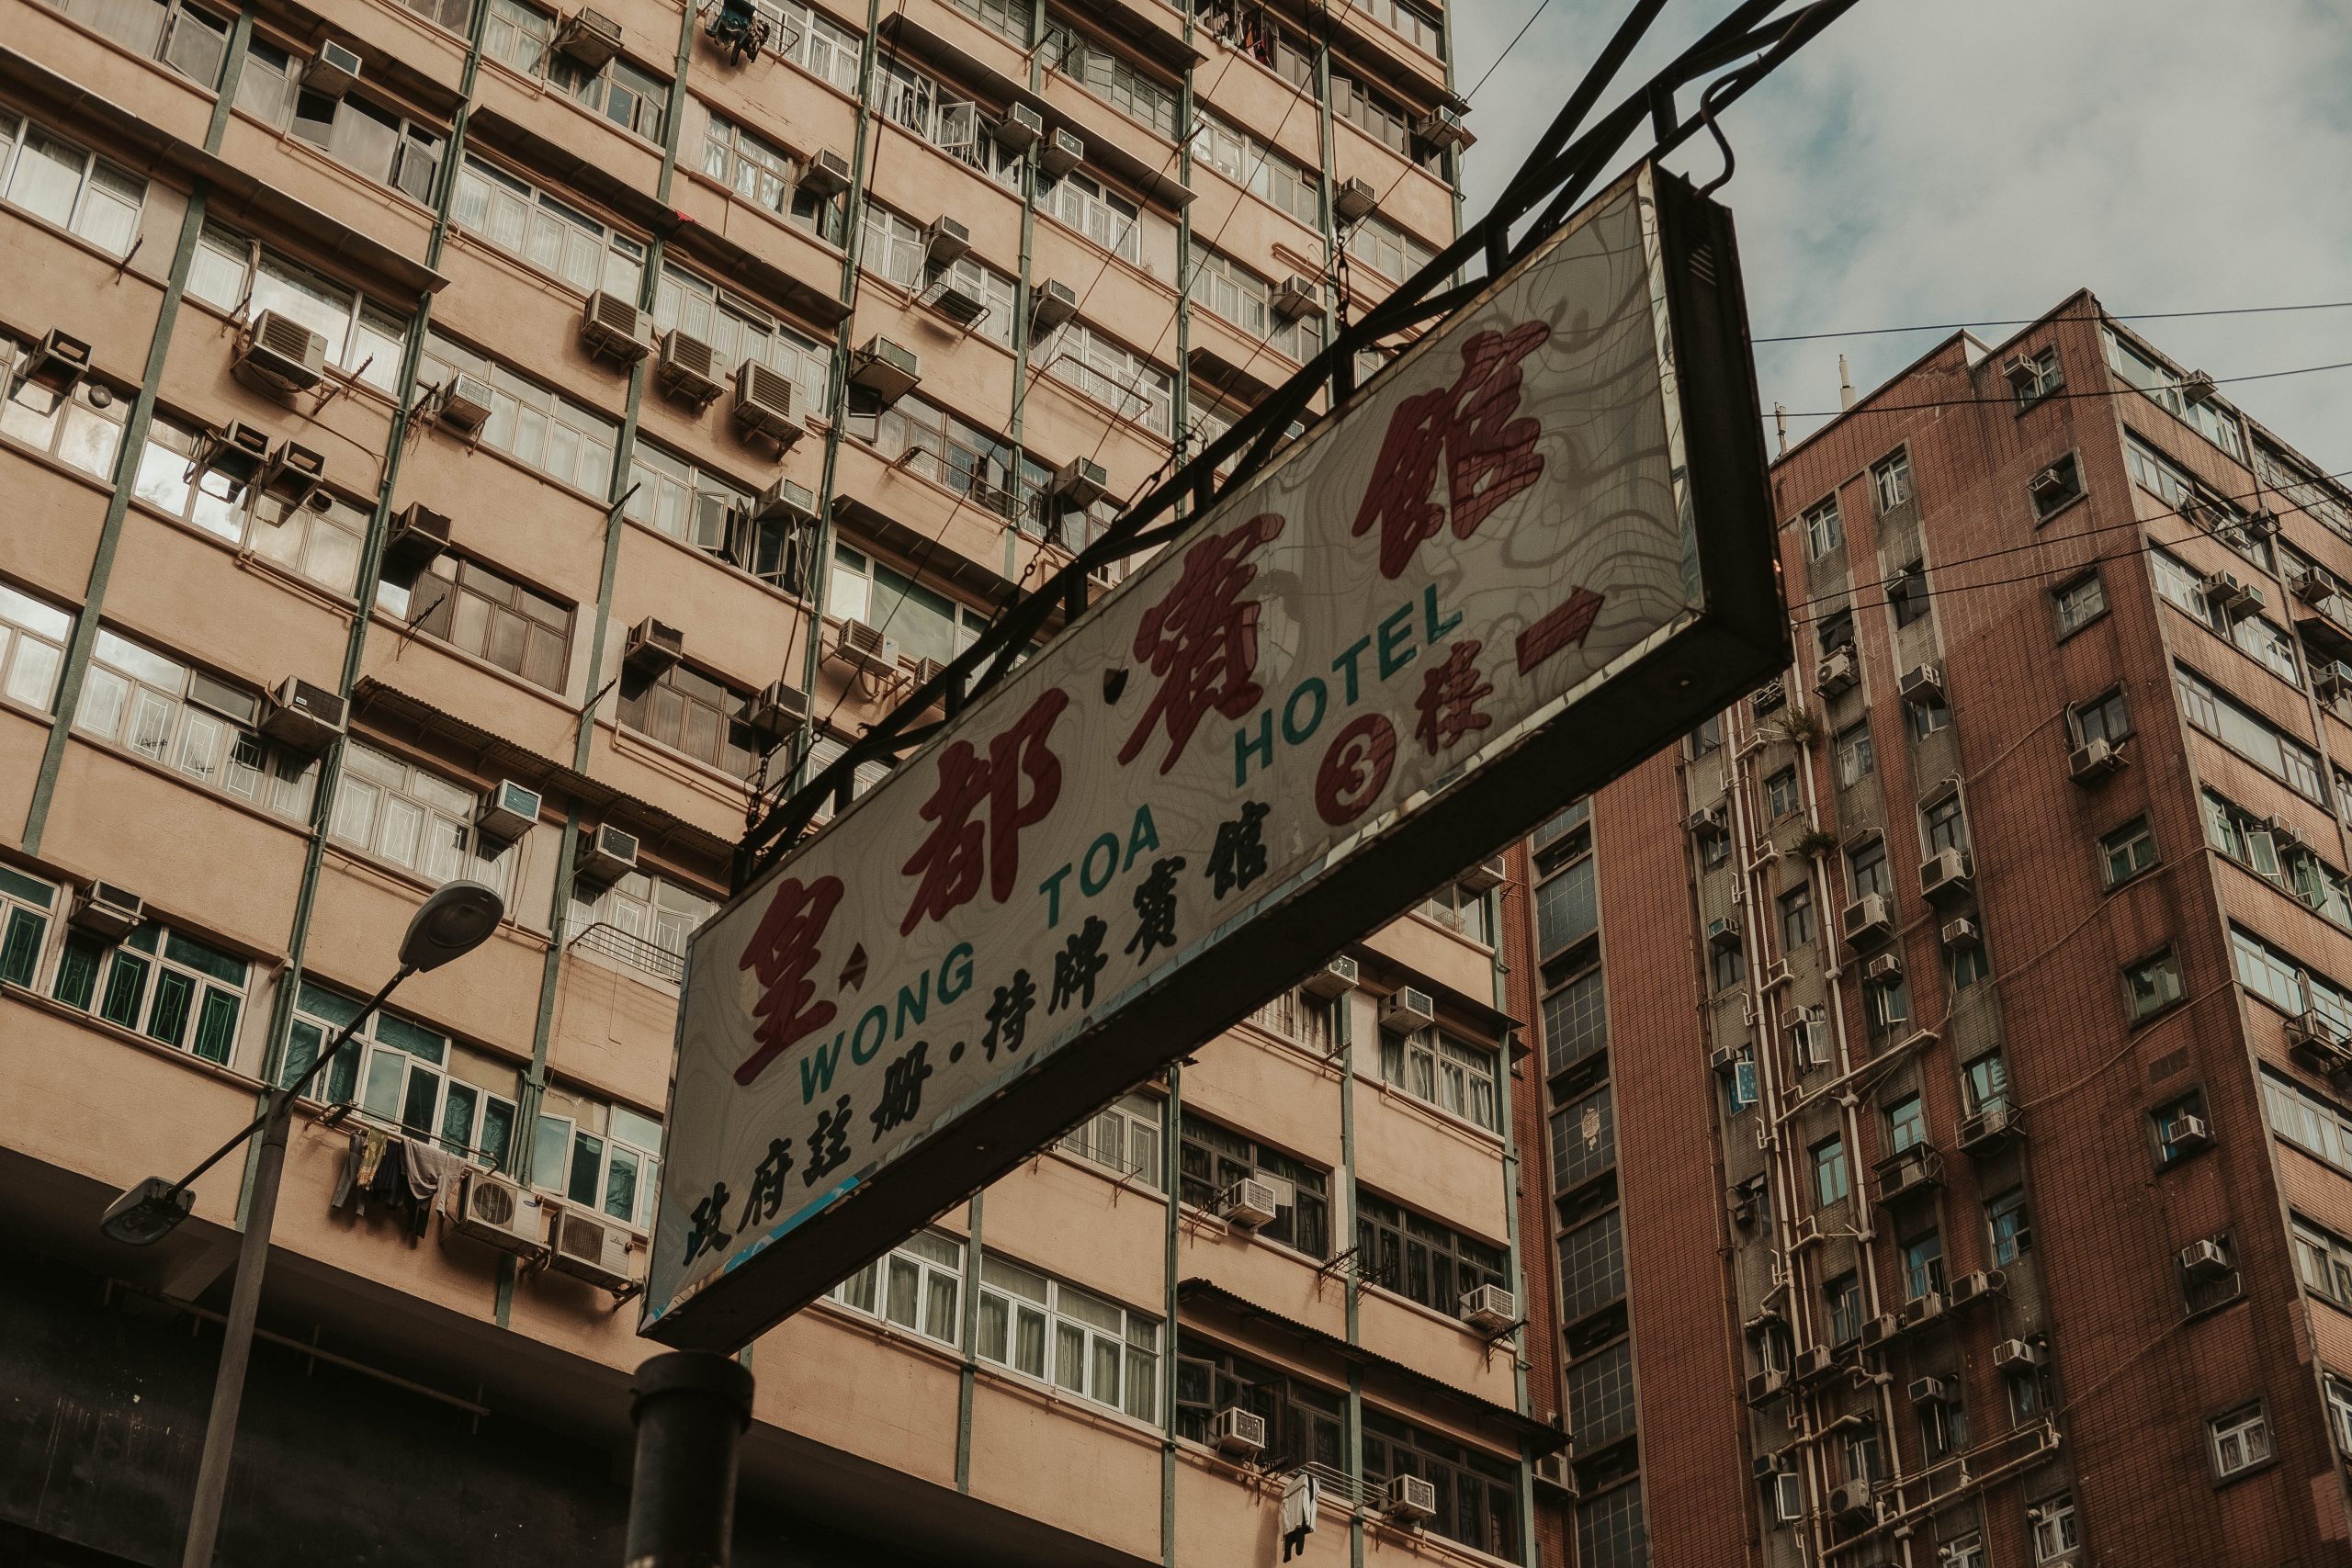 Hong Kong Building with street sign